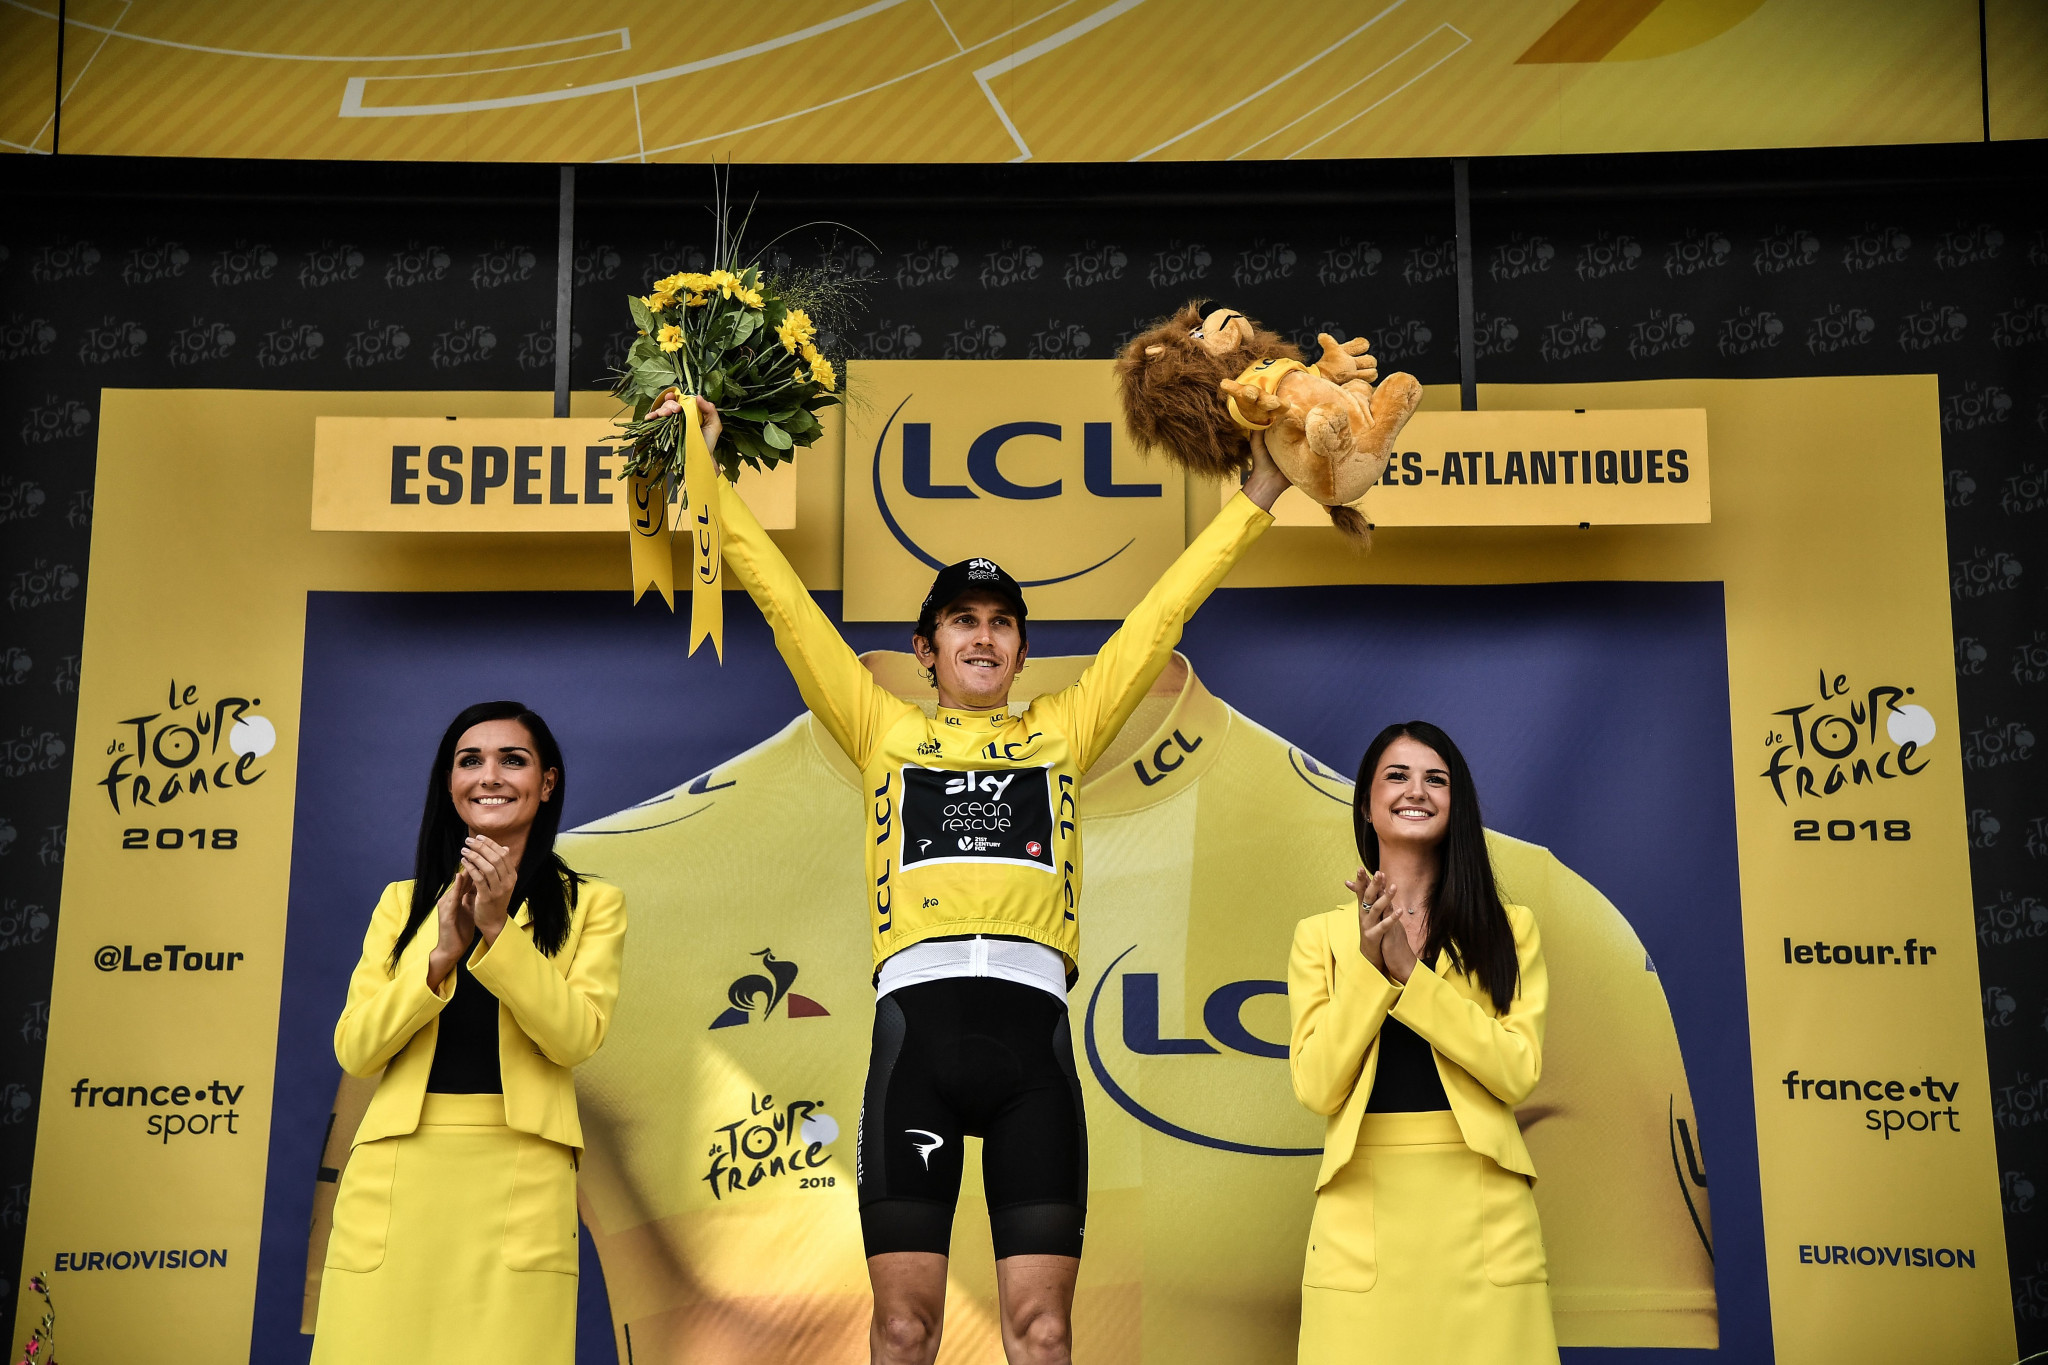 Geraint Thomas finished third in today's time trial and is set to help Team Sky claim their sixth Tour de France victory in seven years following Sir Bradley Wiggins in 2012 and Chris Froome in 2013, 2015, 2016 and 2017 ©Getty Images